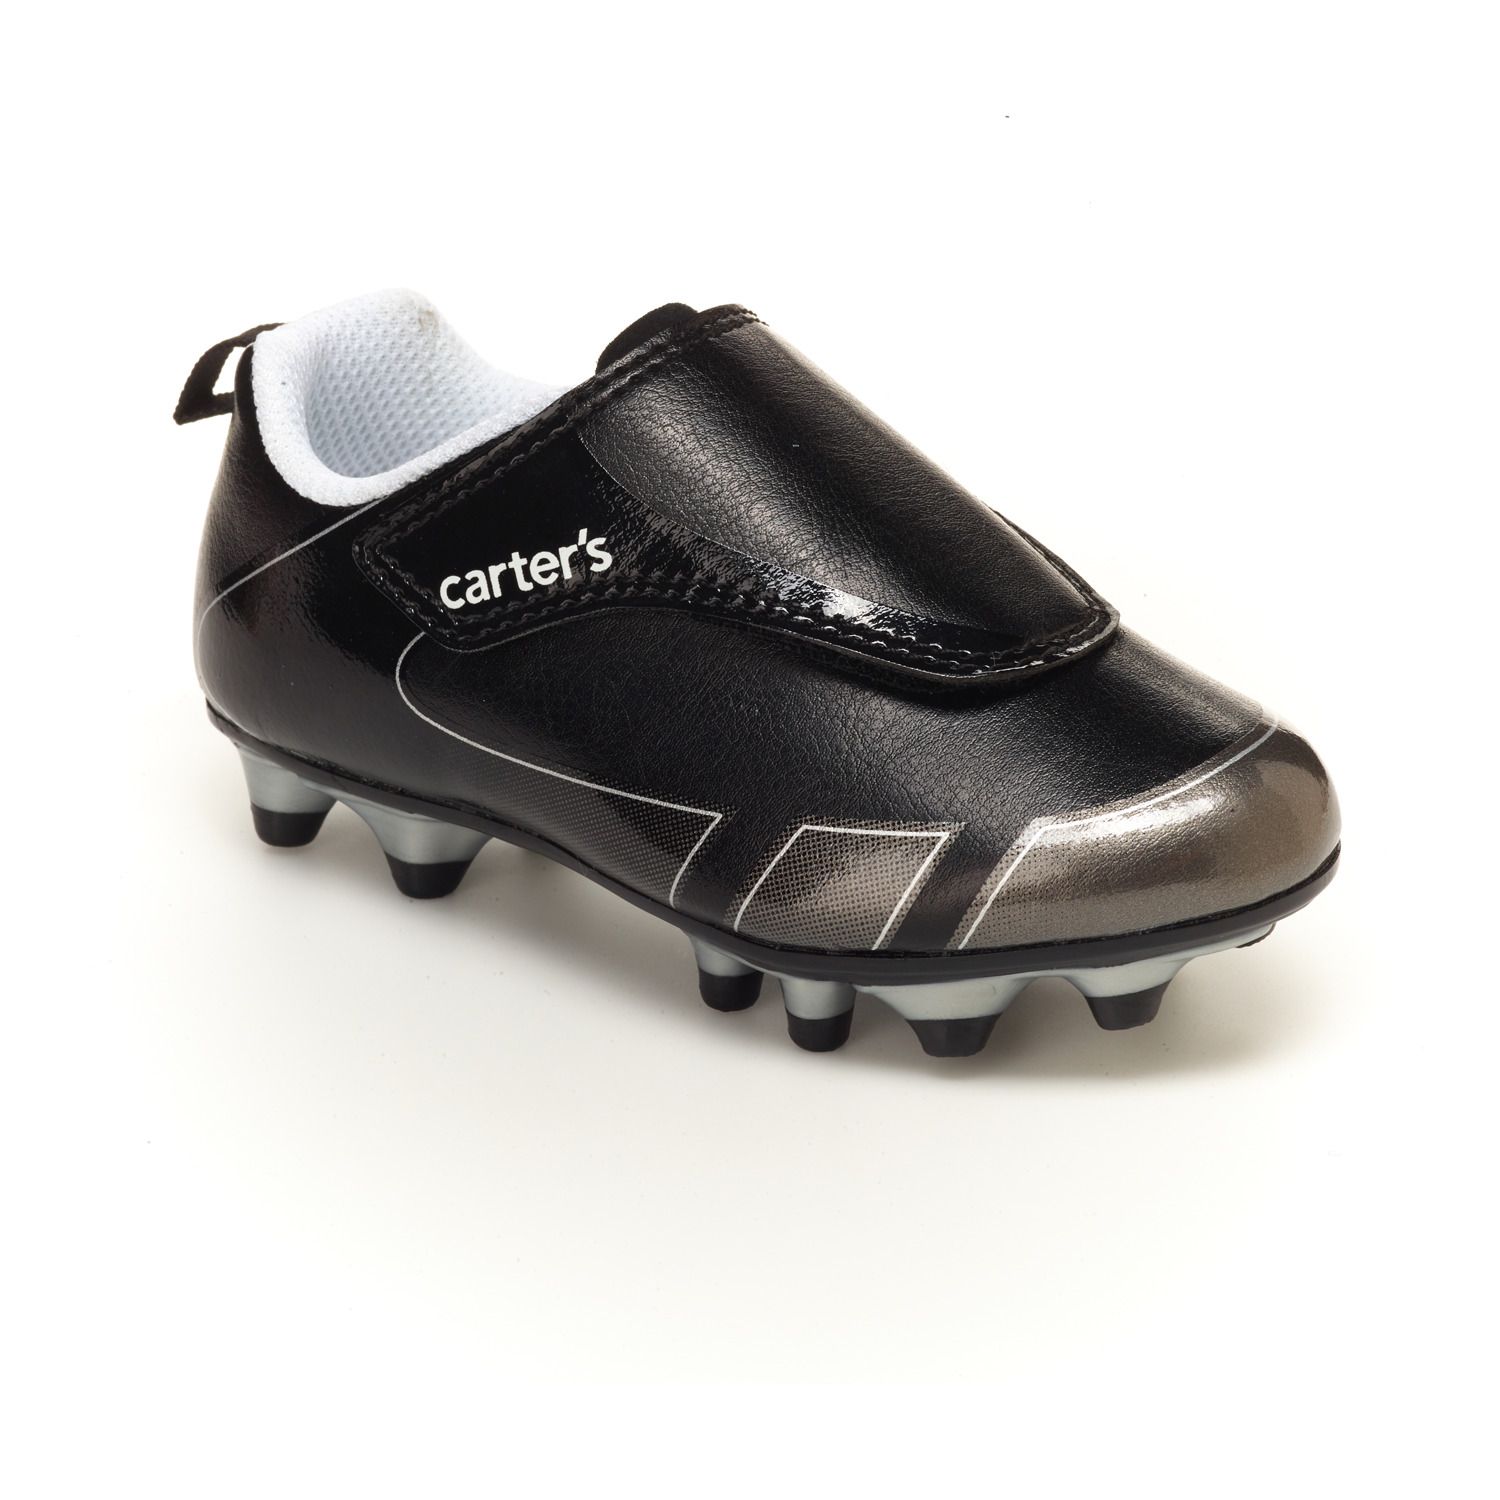 7t soccer cleats